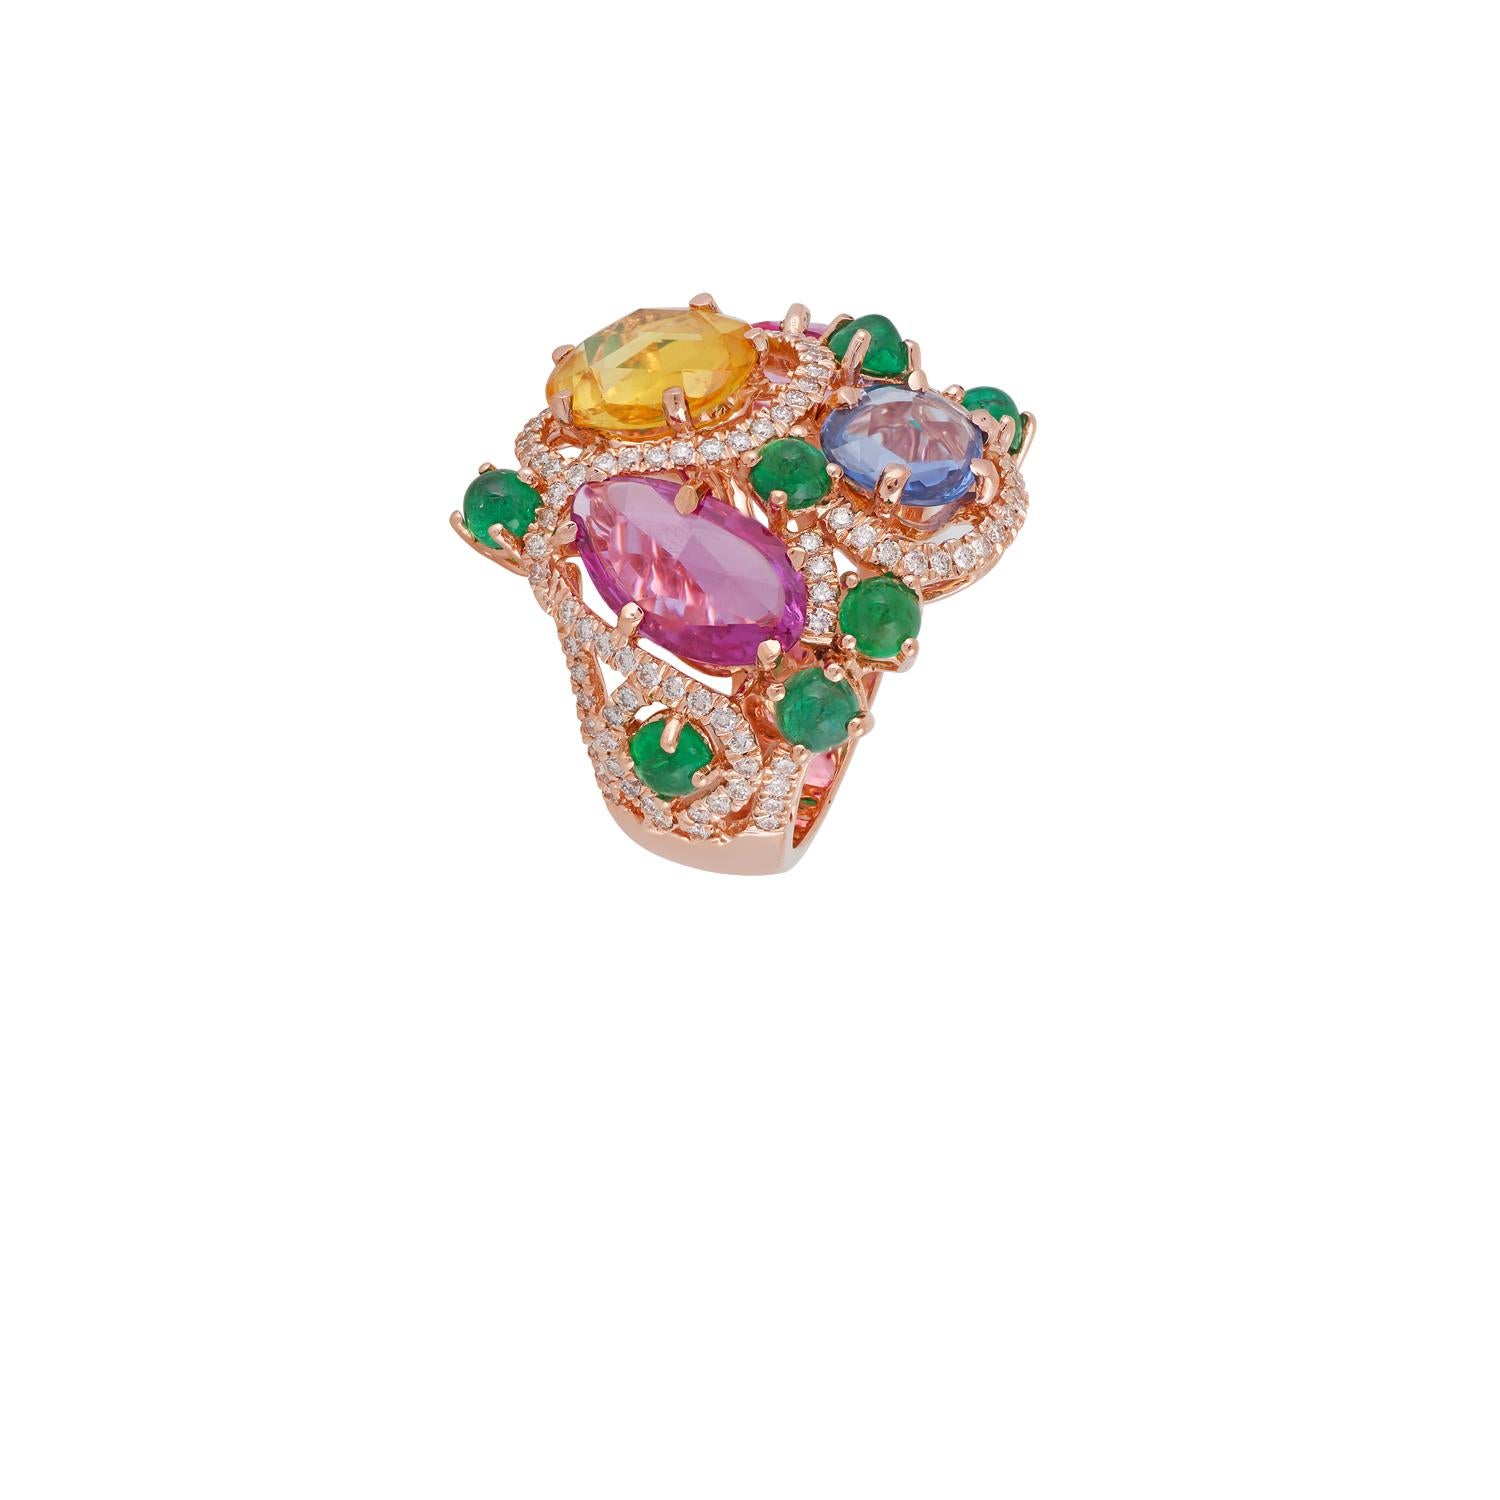 Rose Cut Multi Sapphire - 7.66 Cts.
Cabochon Emerald - 2.06 Cts.
Diamond - 0.78 Cts.
18K Rose Gold - 9.46 Grams 